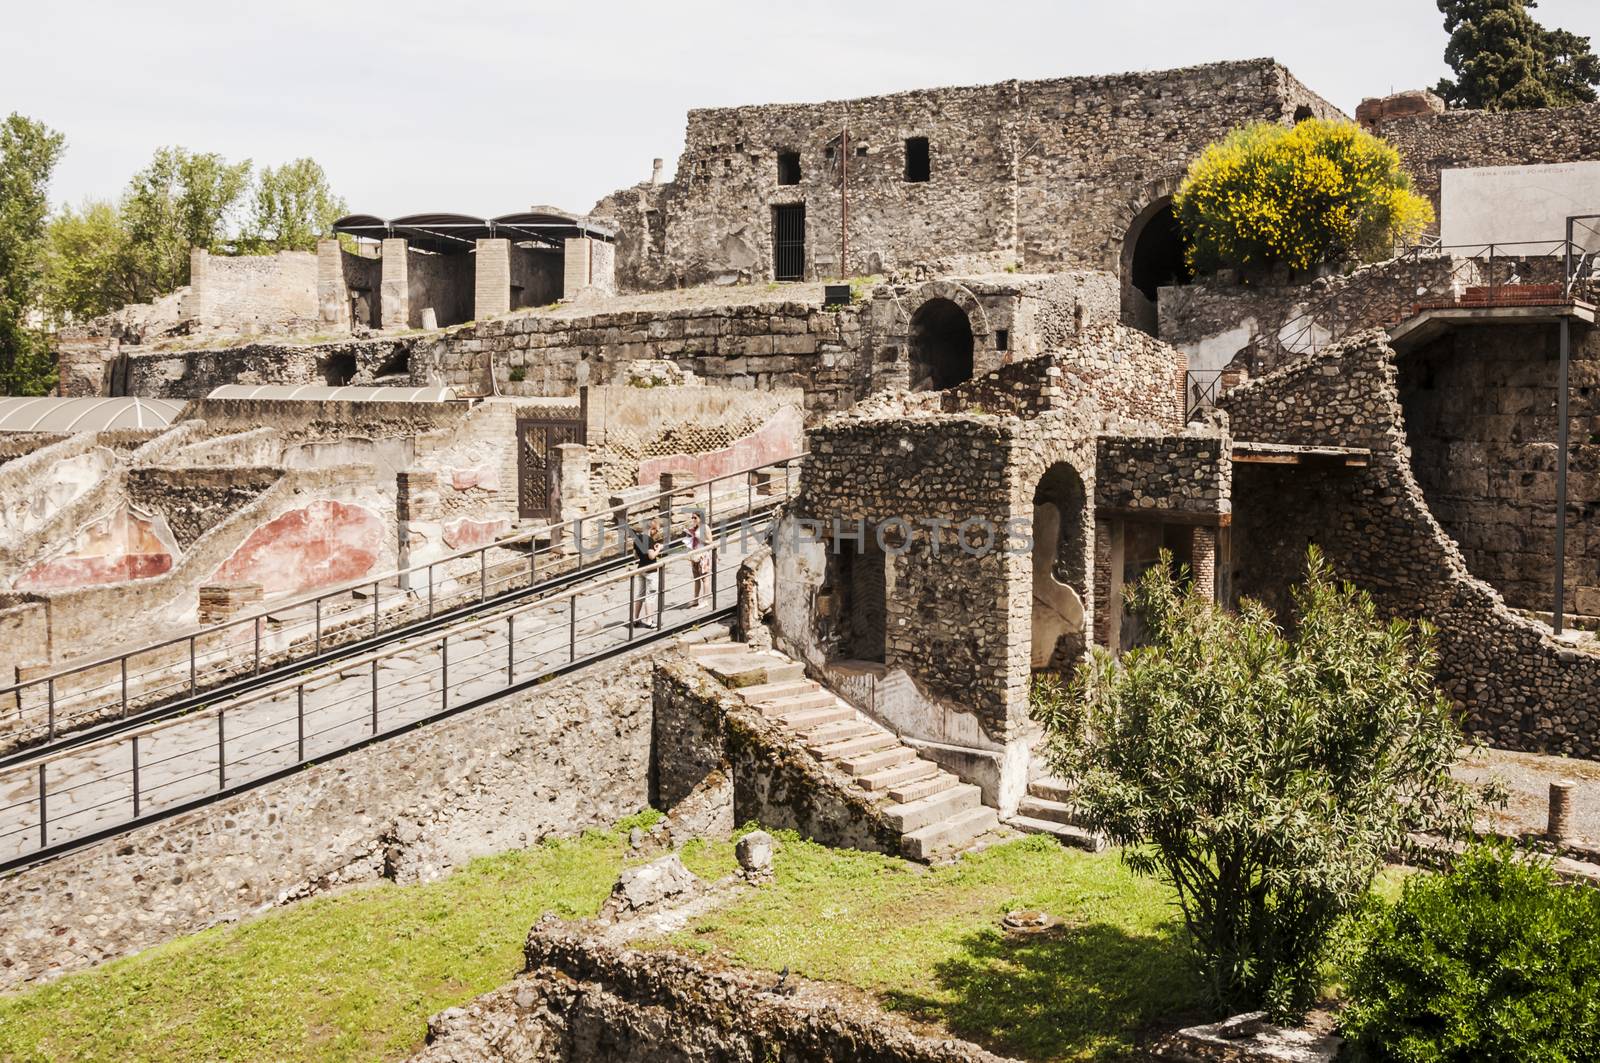 POMPEI APRIL 28: view of the Roman archeologic ruins of the lost city of Pompeii on April 28, 2013 in Pompeii, Italy